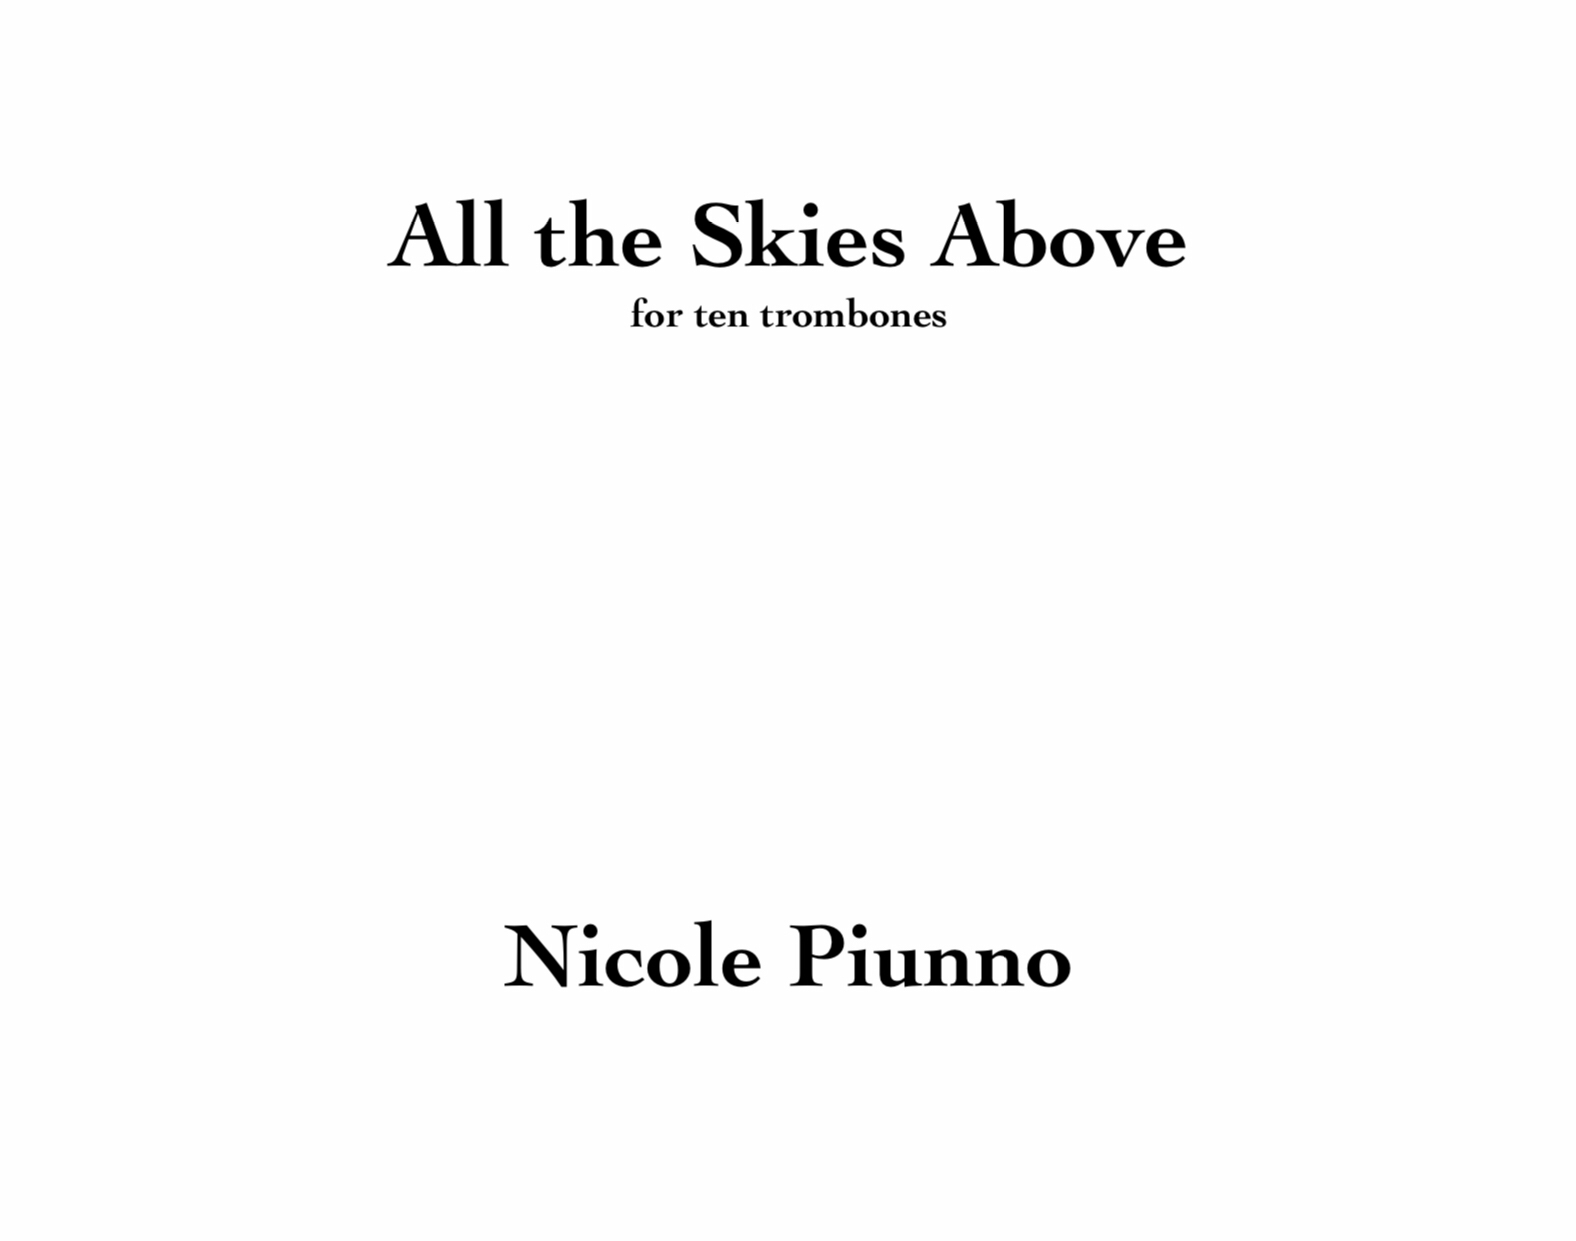 All The Skies Aboove by Nicole Piunno